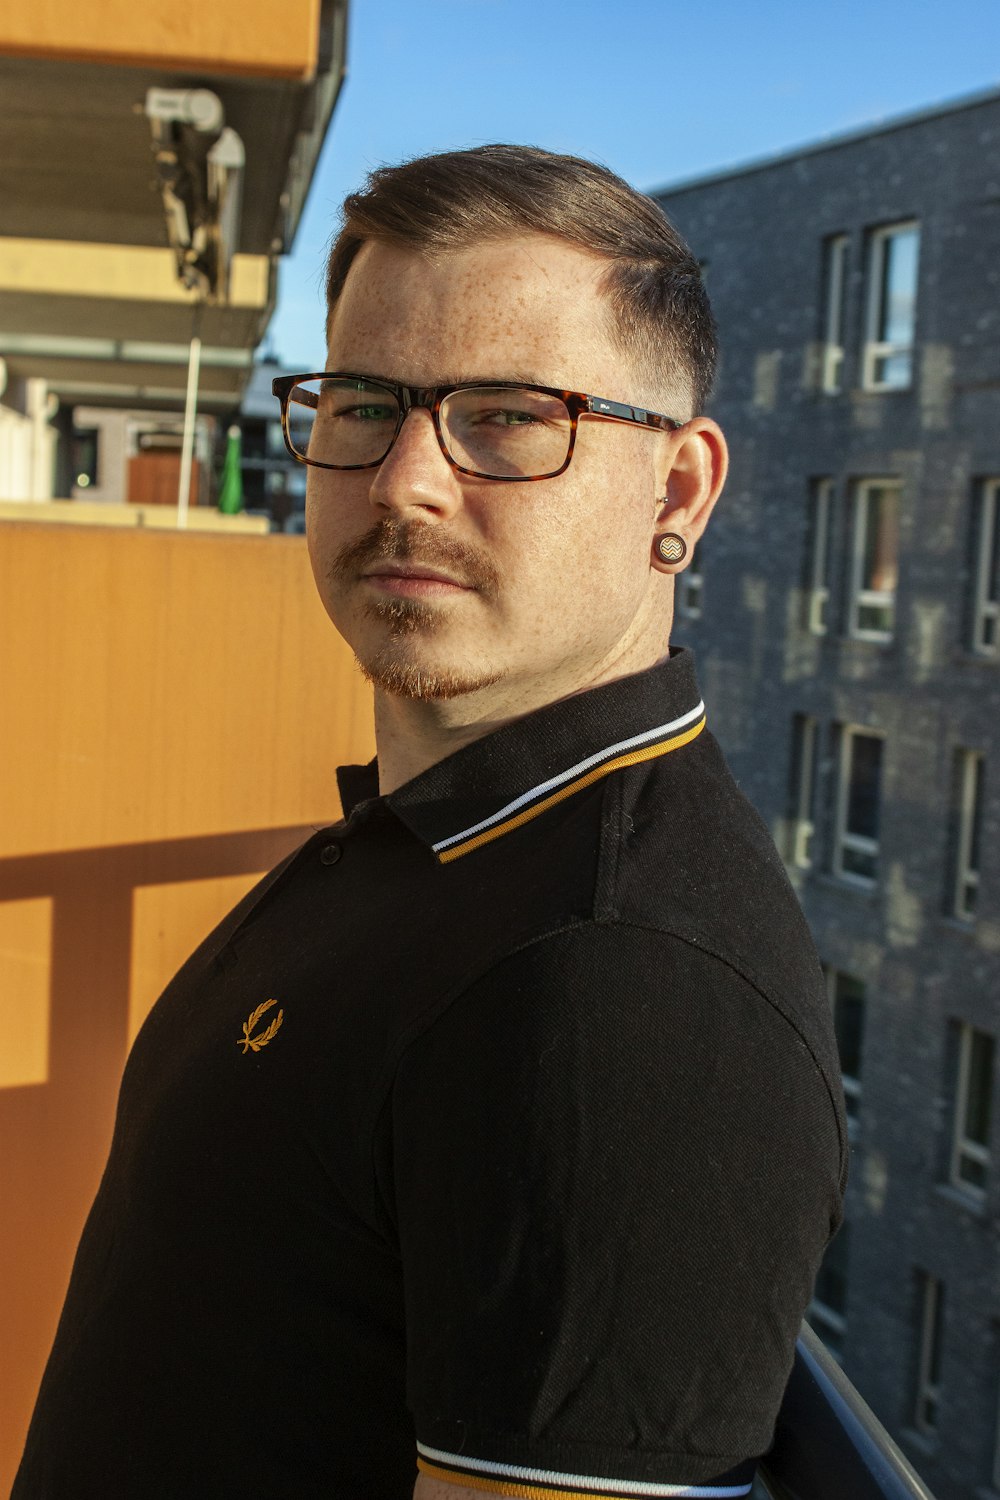 man in black and yellow polo shirt wearing black framed eyeglasses